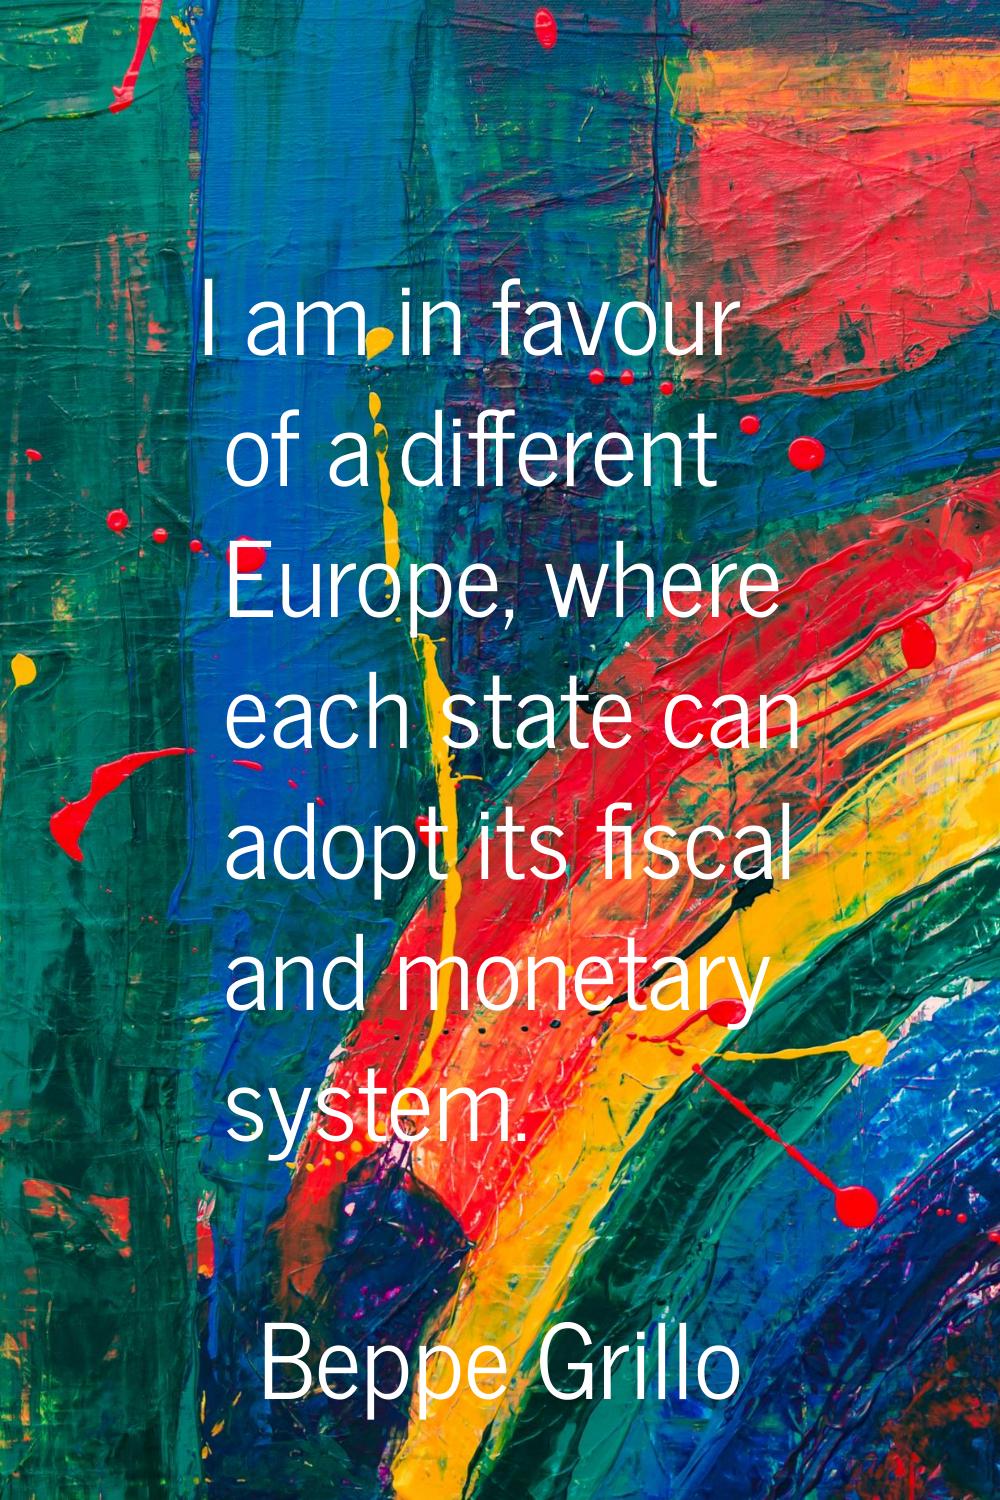 I am in favour of a different Europe, where each state can adopt its fiscal and monetary system.